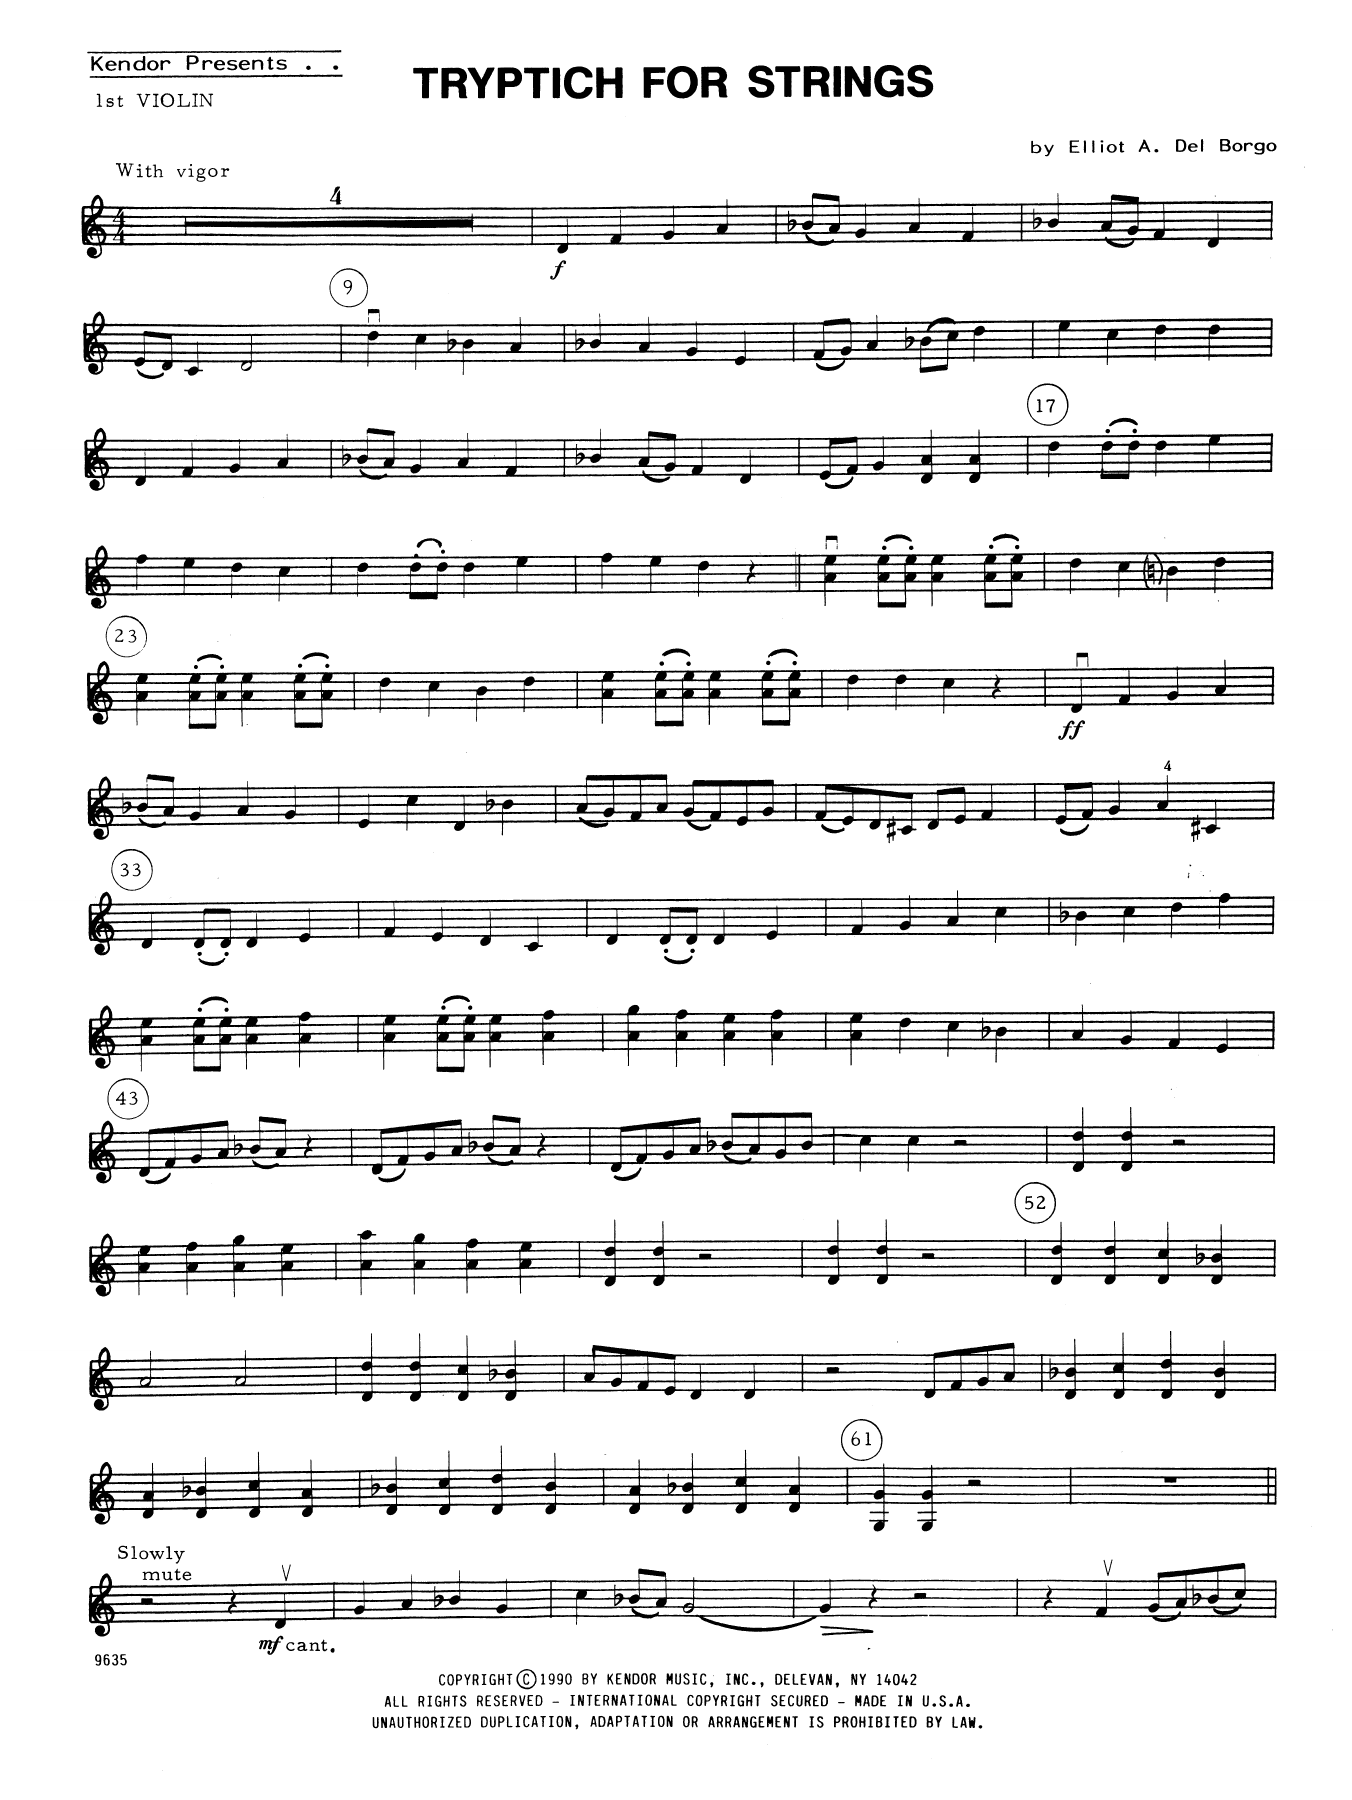 Download Elliot A. Del Borgo Tryptich For Strings - 1st Violin Sheet Music